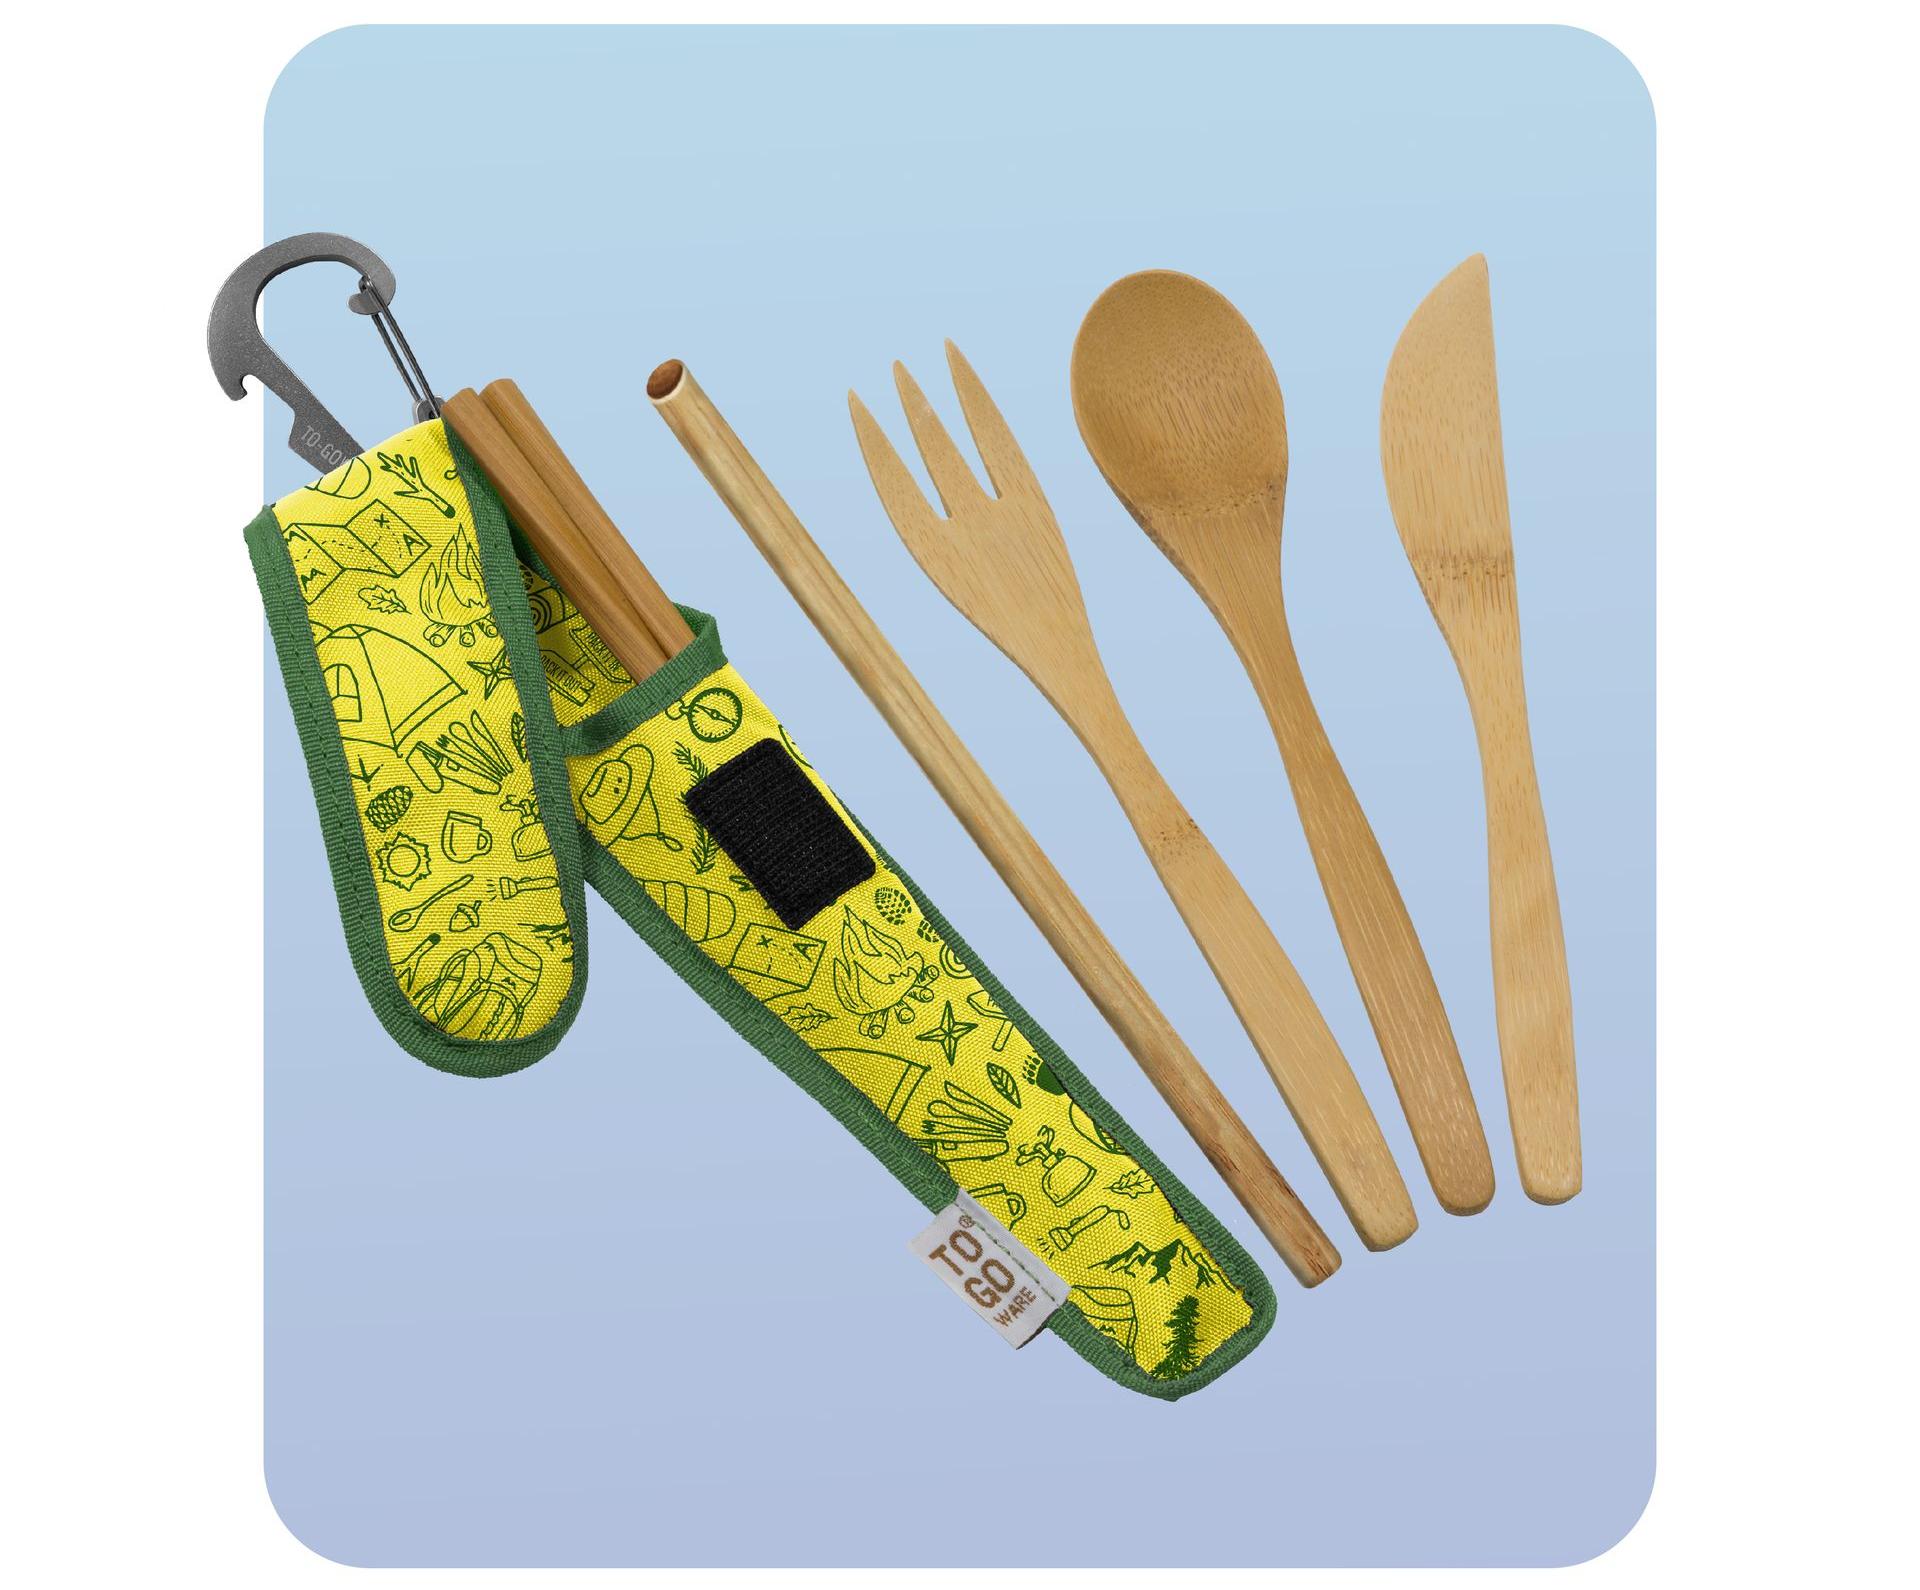 To go Ware's Premium Utensil Set, Shown in th Happy Camper Style showcasing the Bamboo utensils and useful Bottle Opener. 